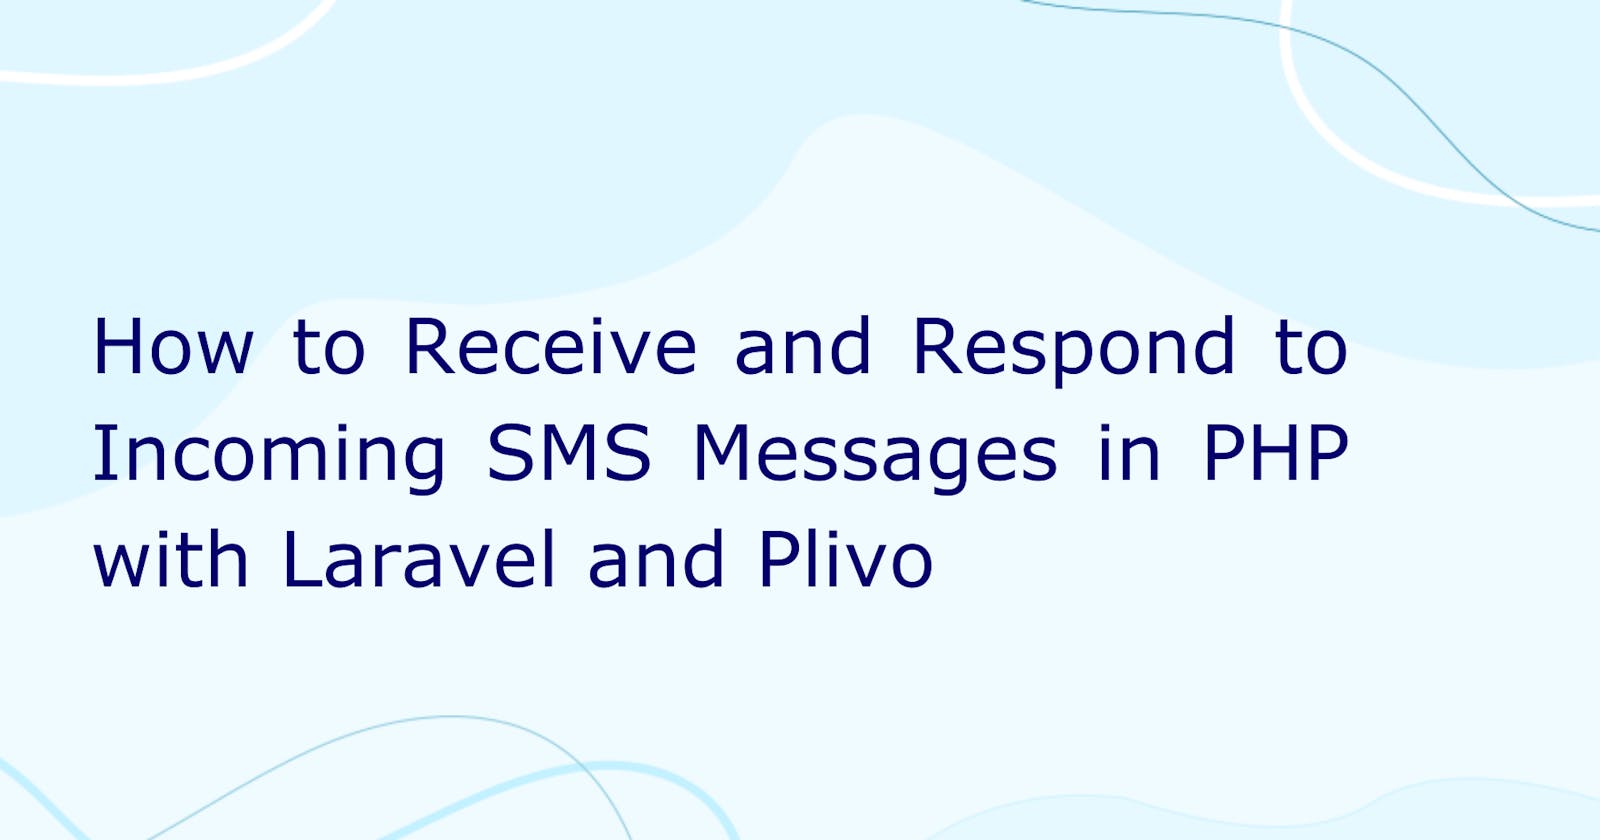 How to Receive and Respond to Incoming SMS Messages in PHP with Laravel and Plivo